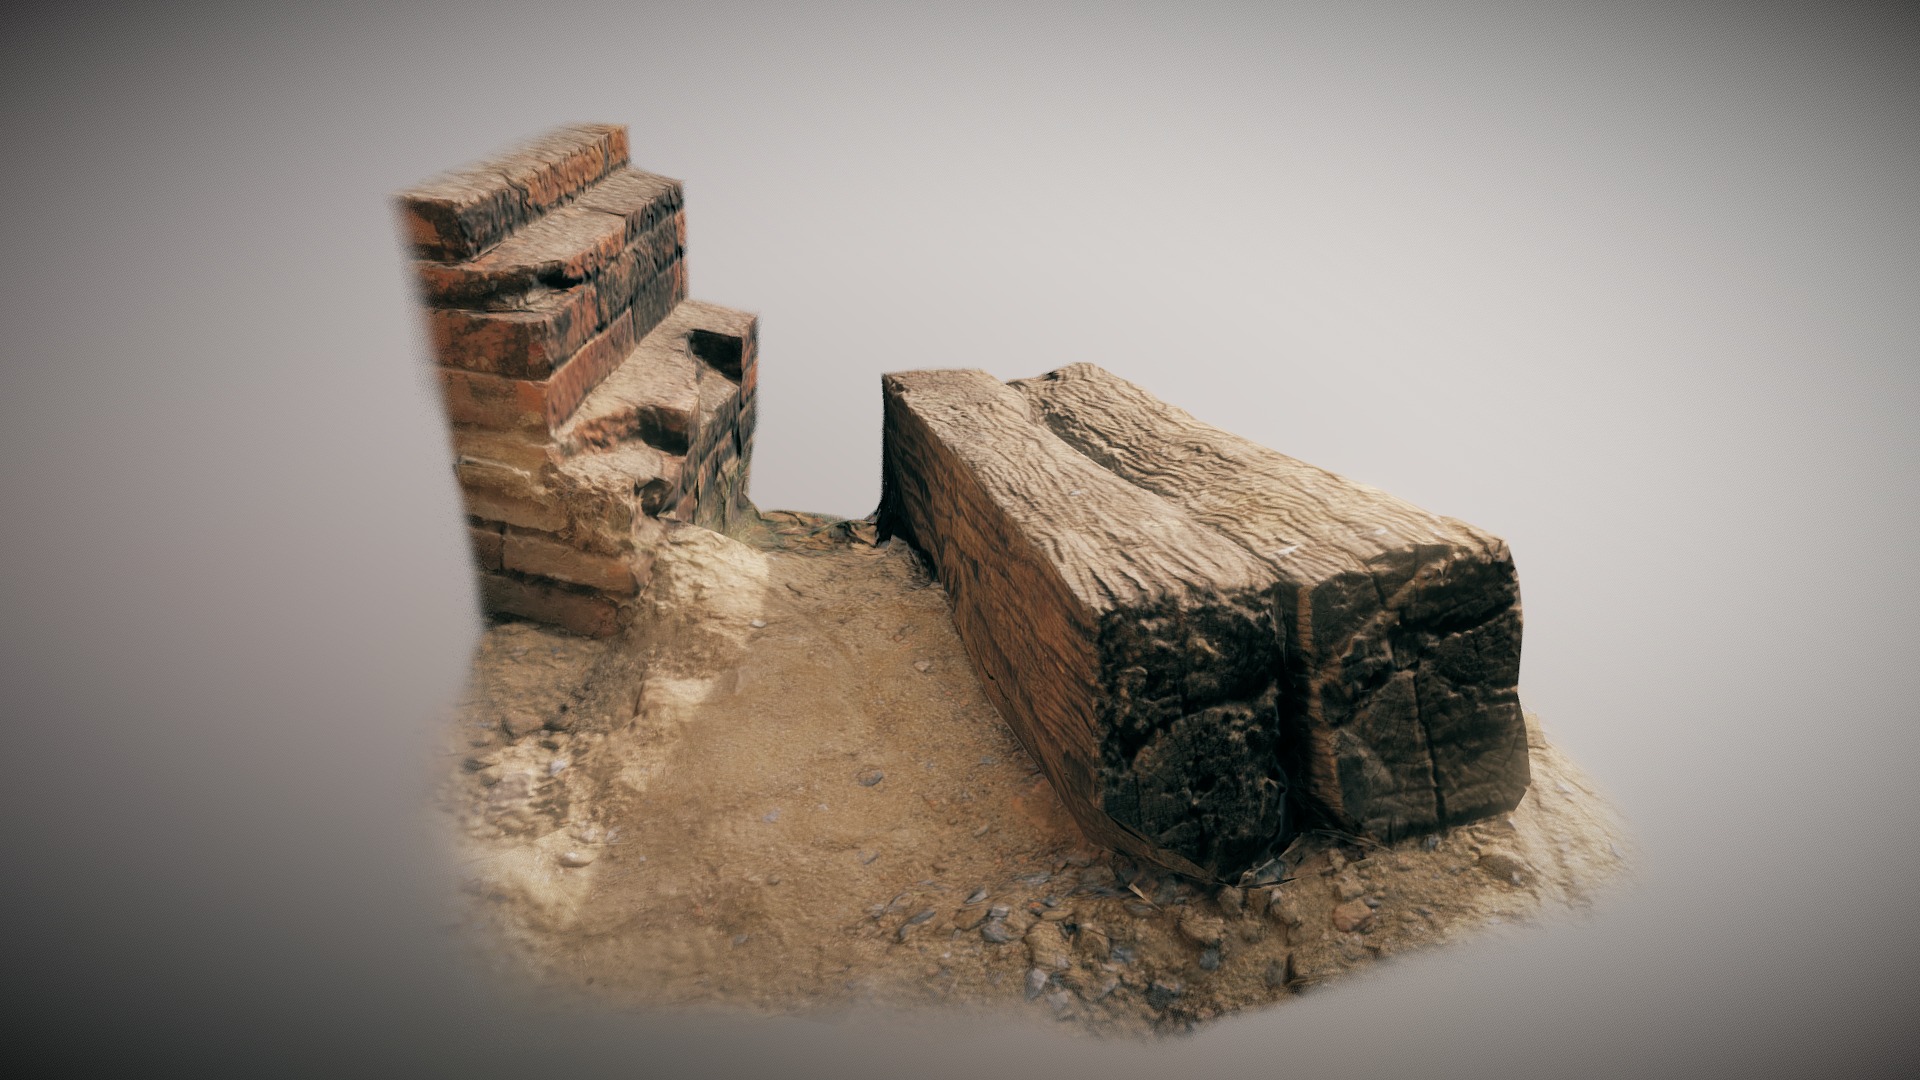 3D model Old Wood in Historical Site - This is a 3D model of the Old Wood in Historical Site. The 3D model is about a stone structure with a hole in it.